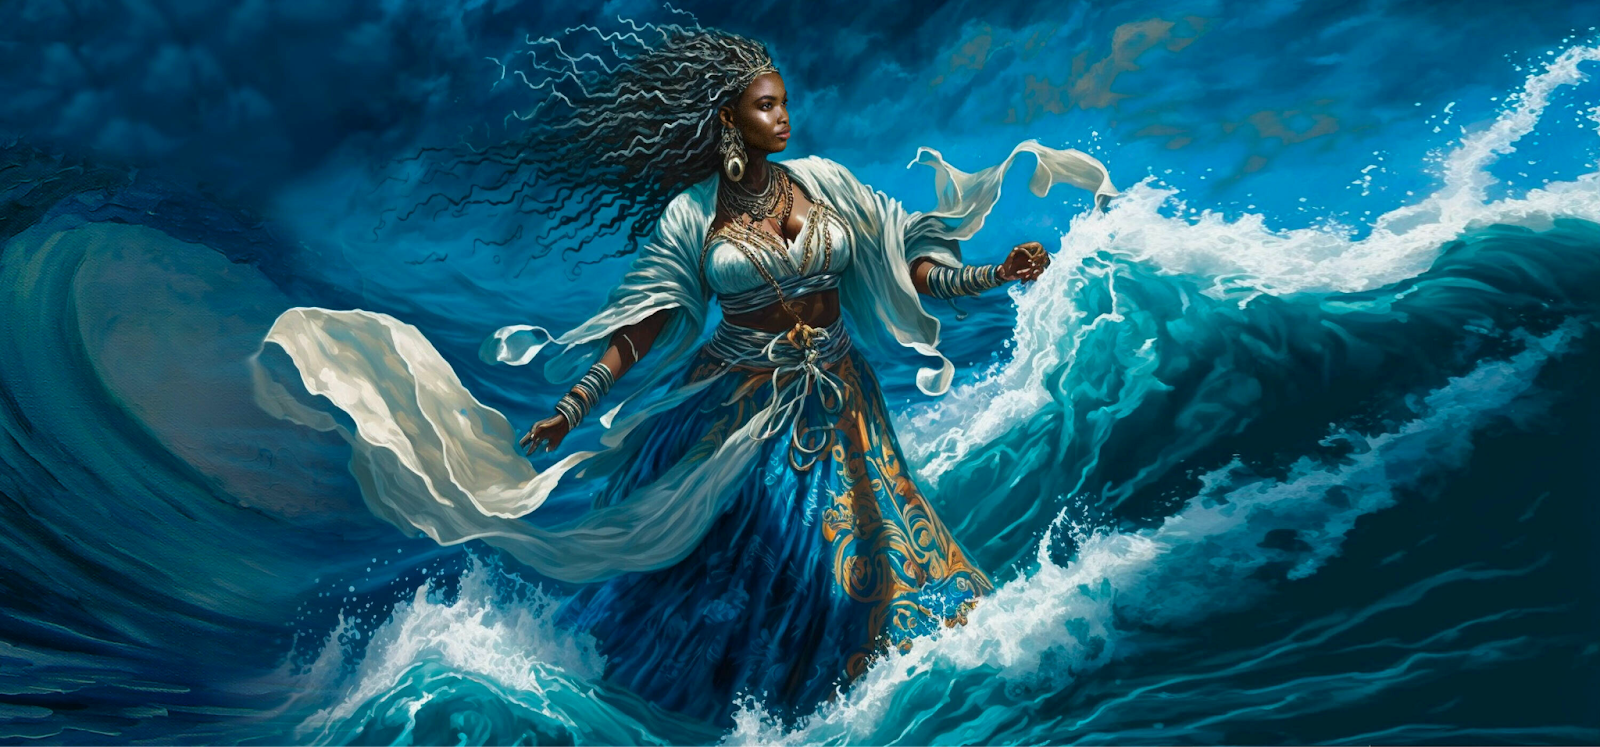 Yemaja stands as a mighty figure towering over crashing waves. She wears a long flowing skirt, lots of precious jewelry, and exudes power. 